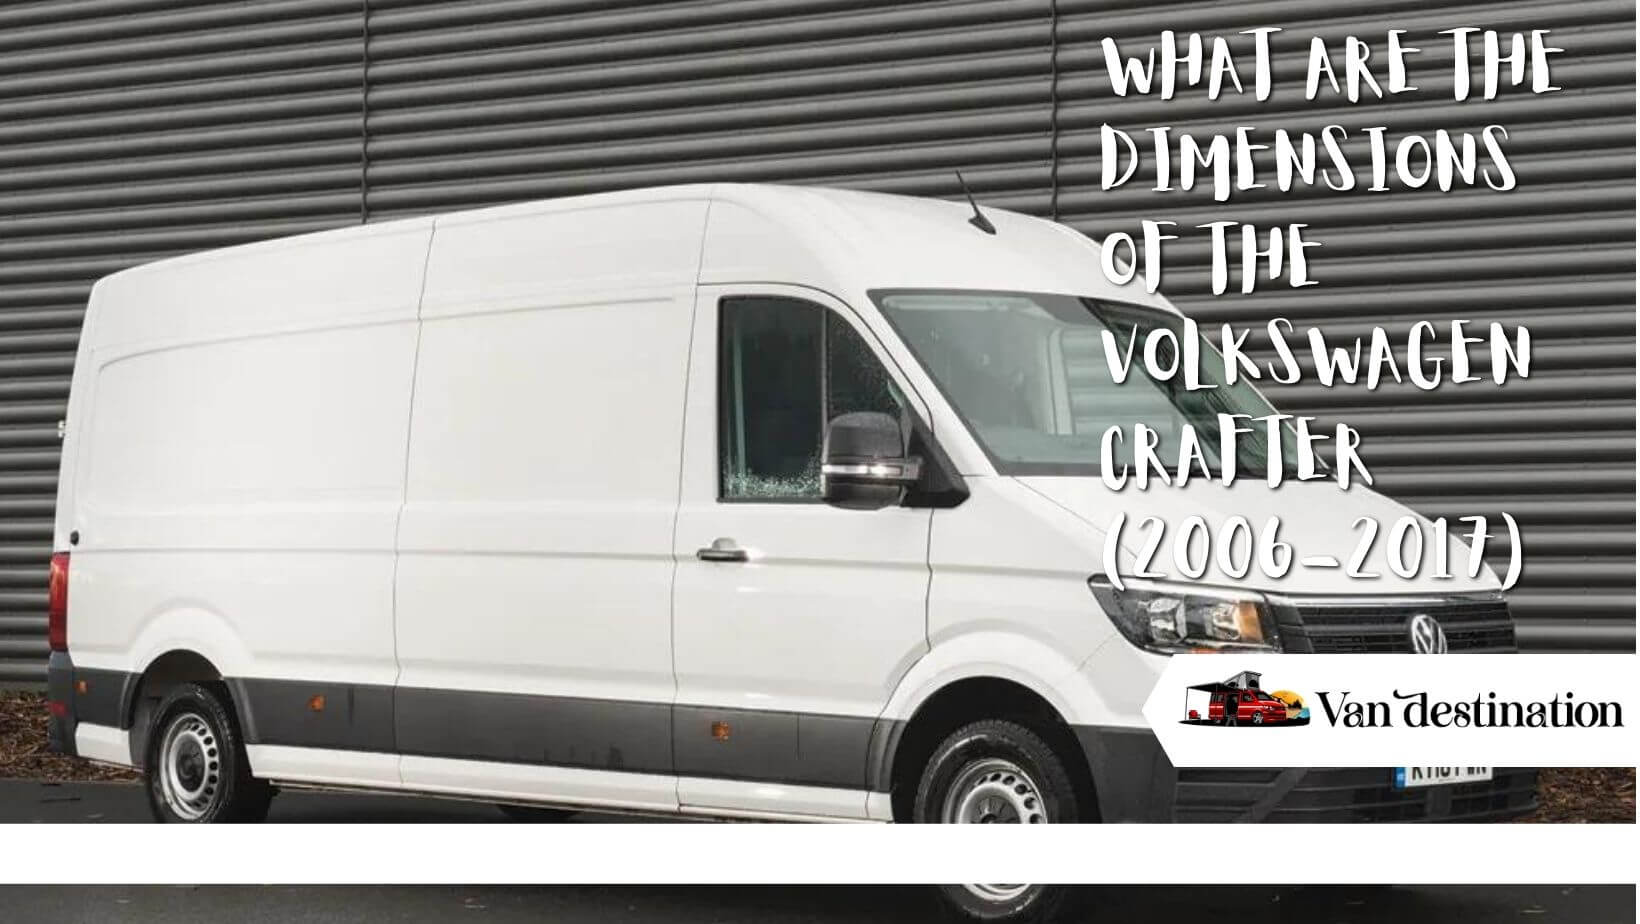 What are the Dimensions of the Volkswagen Crafter (2006-2017)